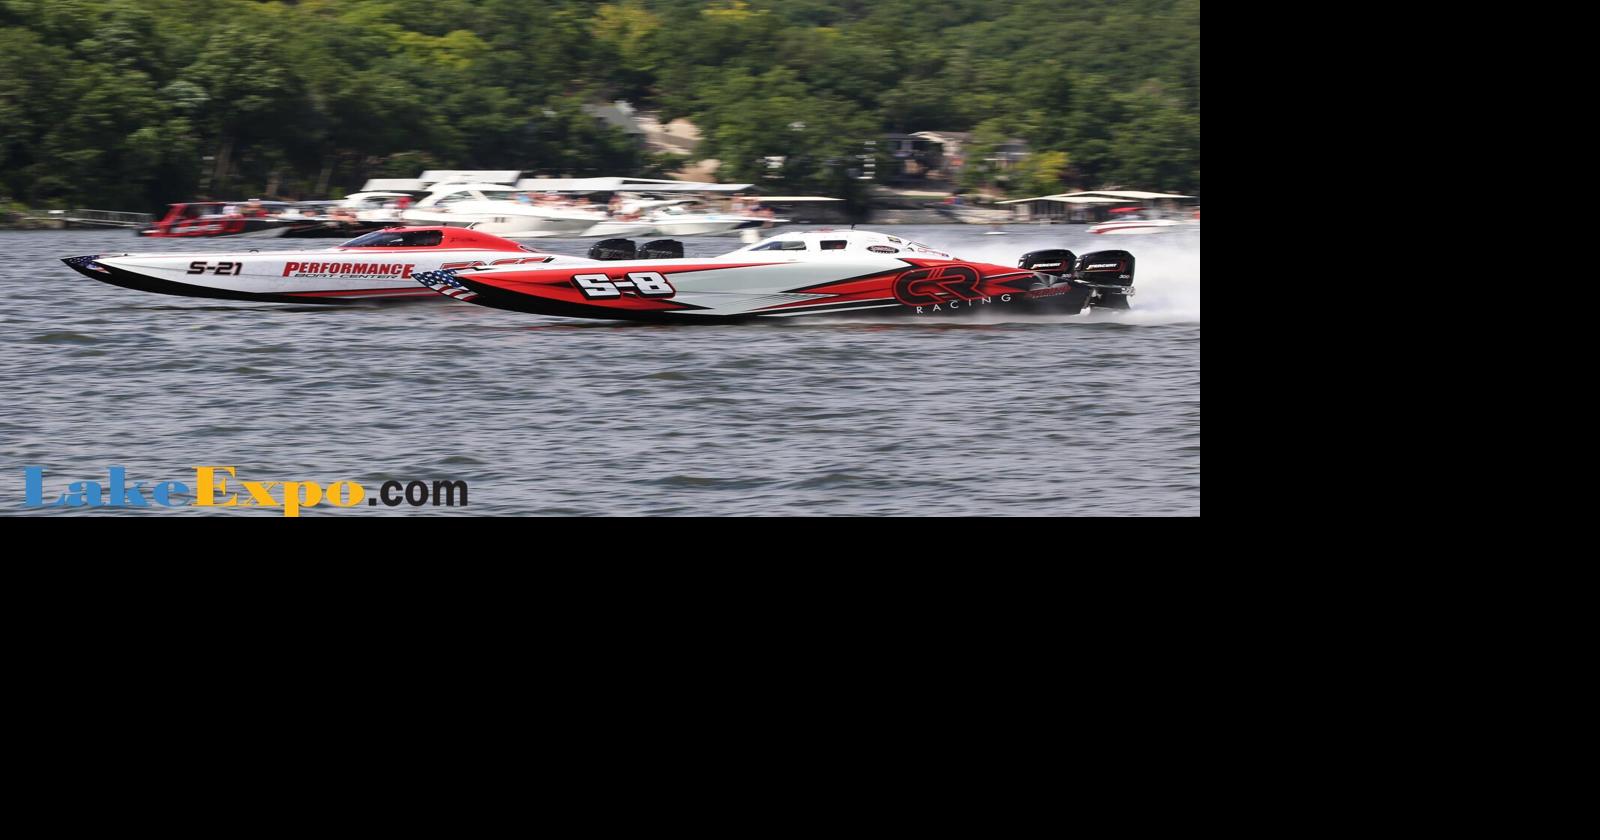 LOTO Powerfest! Cool 102.7 To Broadcast The June Boat Race At Lake Of